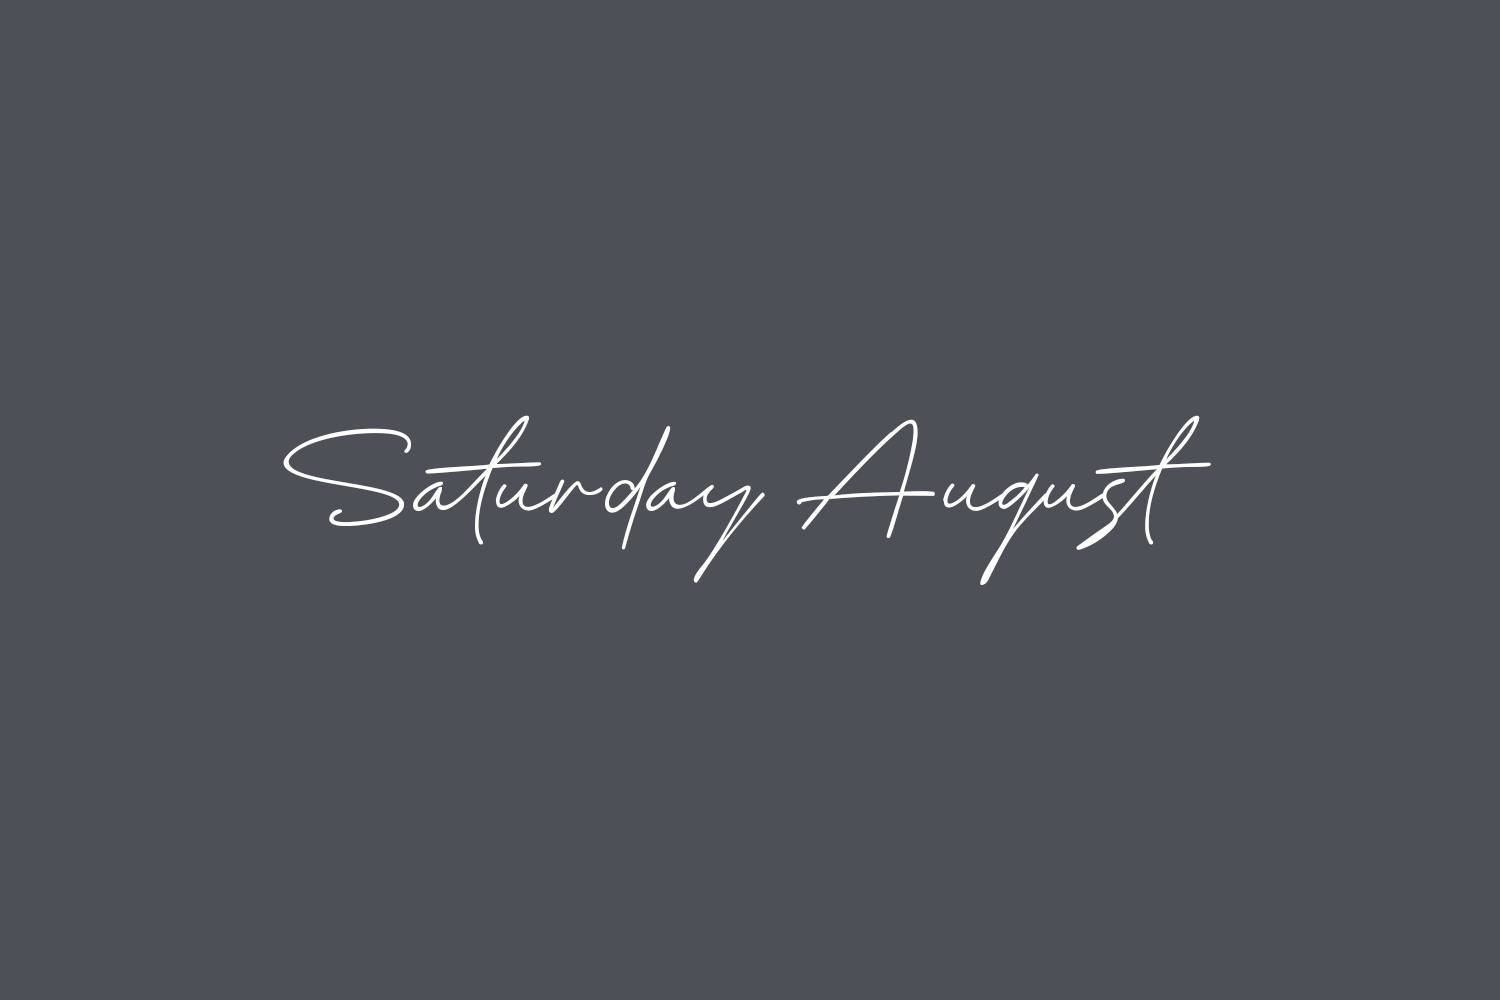 Saturday August Free Font